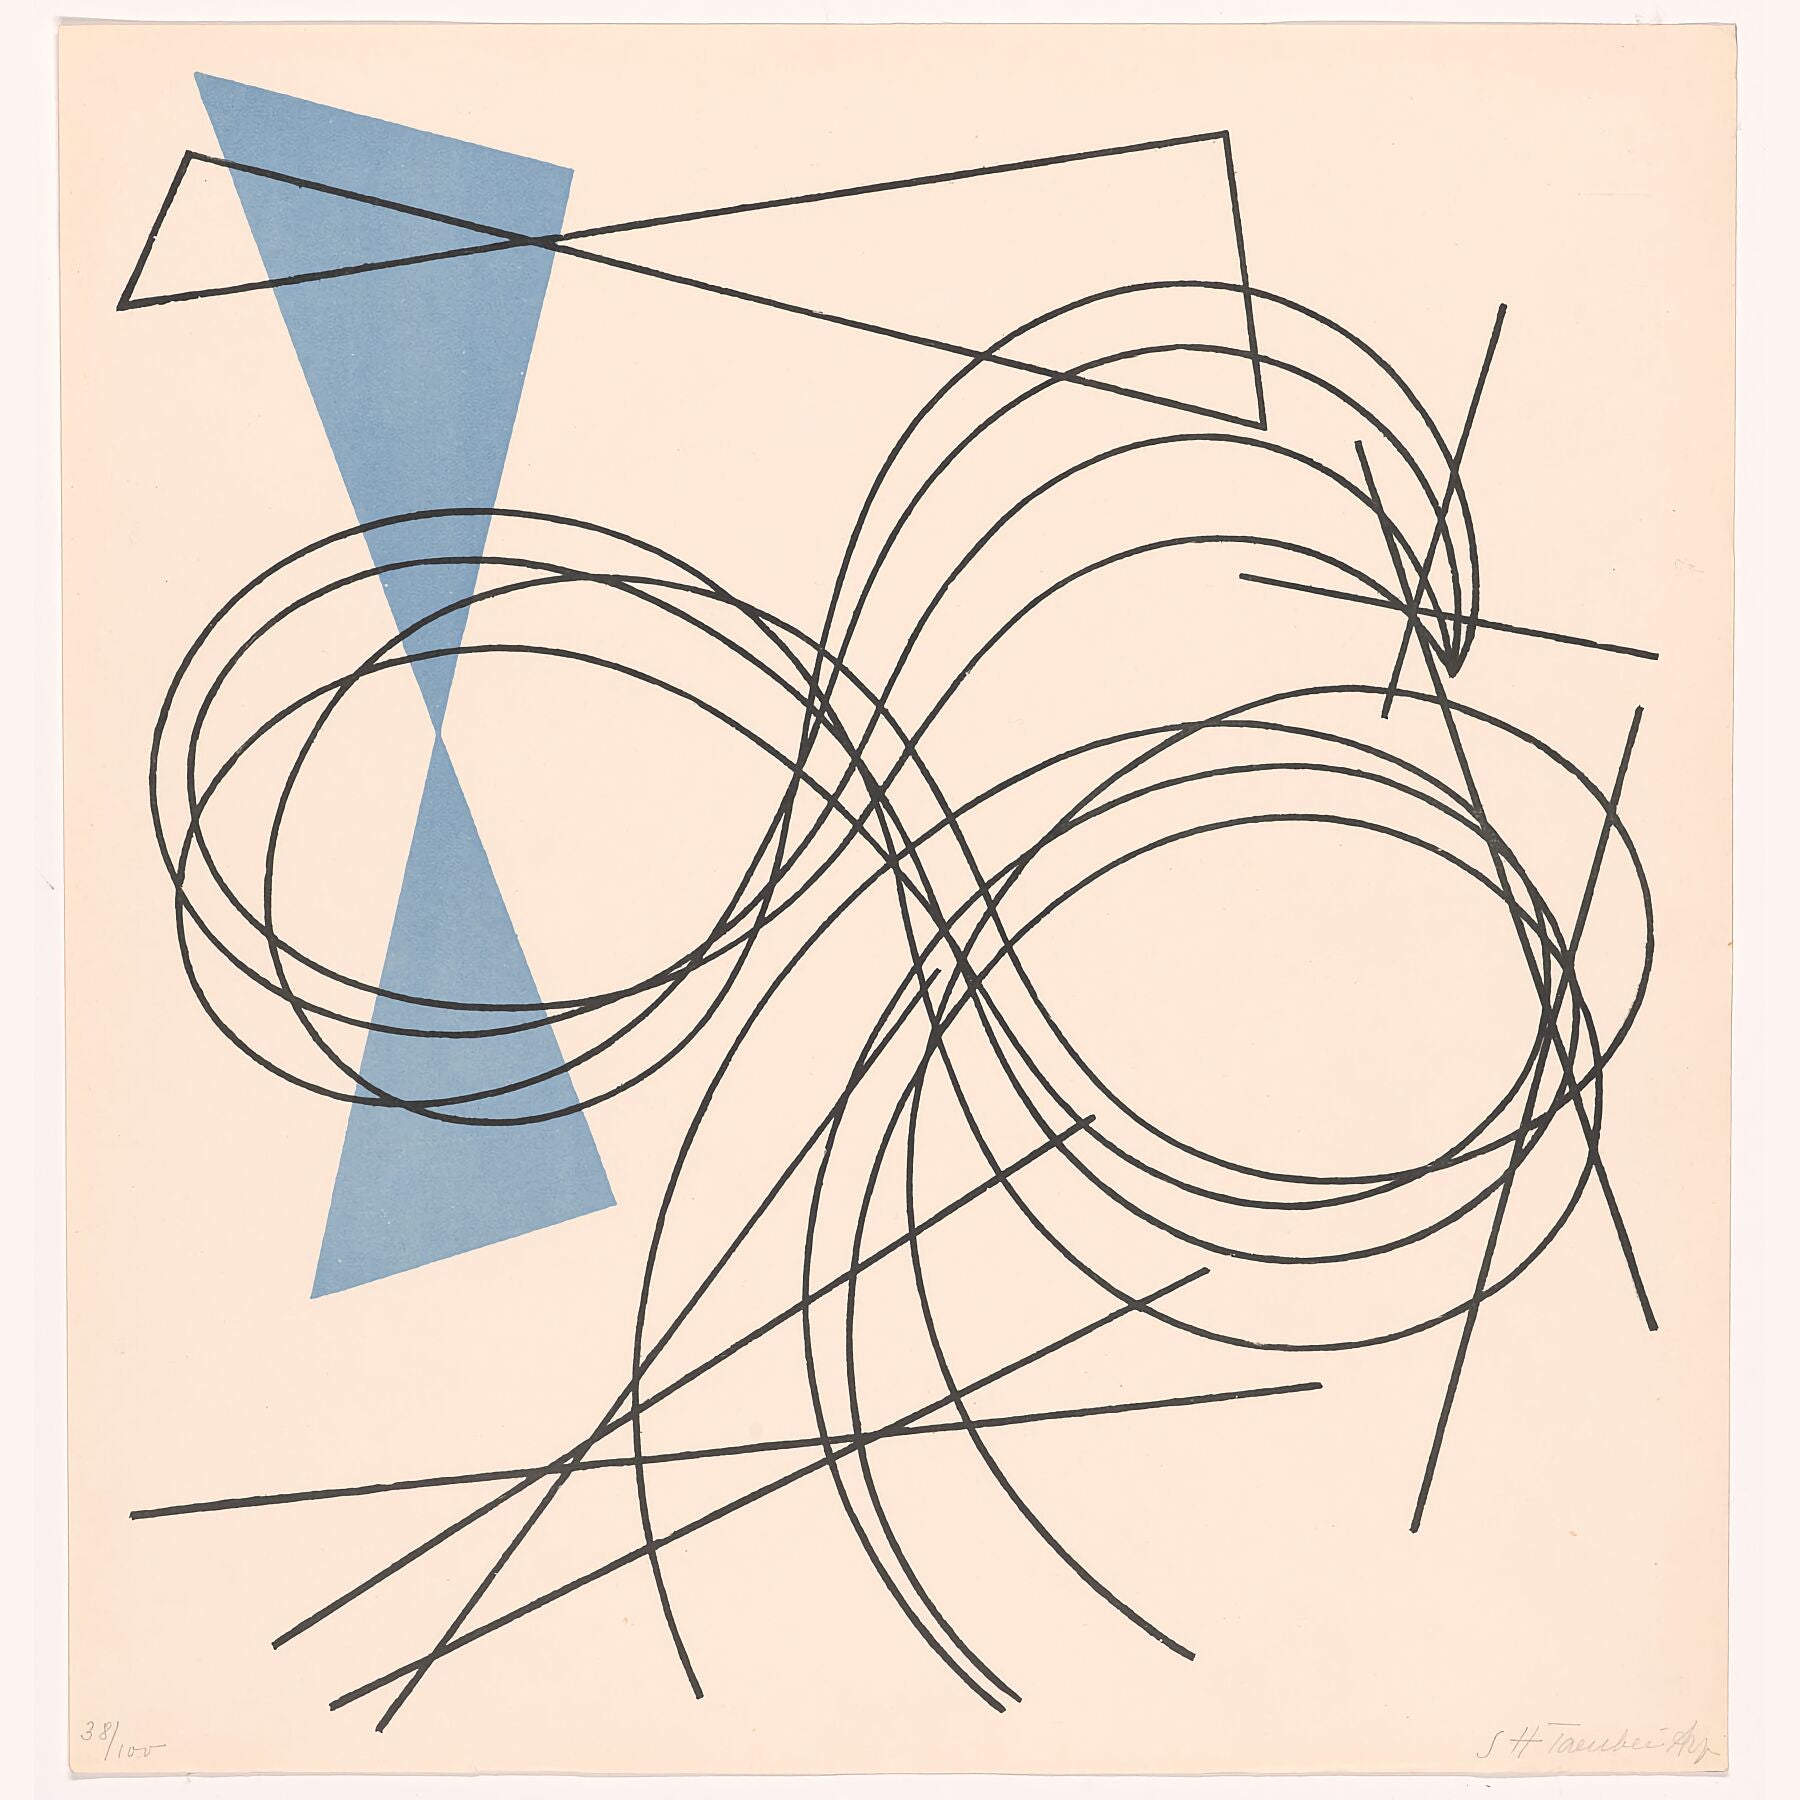 Plate (folio 15) from 5 Constructionen + 5 Compositionen by Sophie Taeuber-Arp - 1941